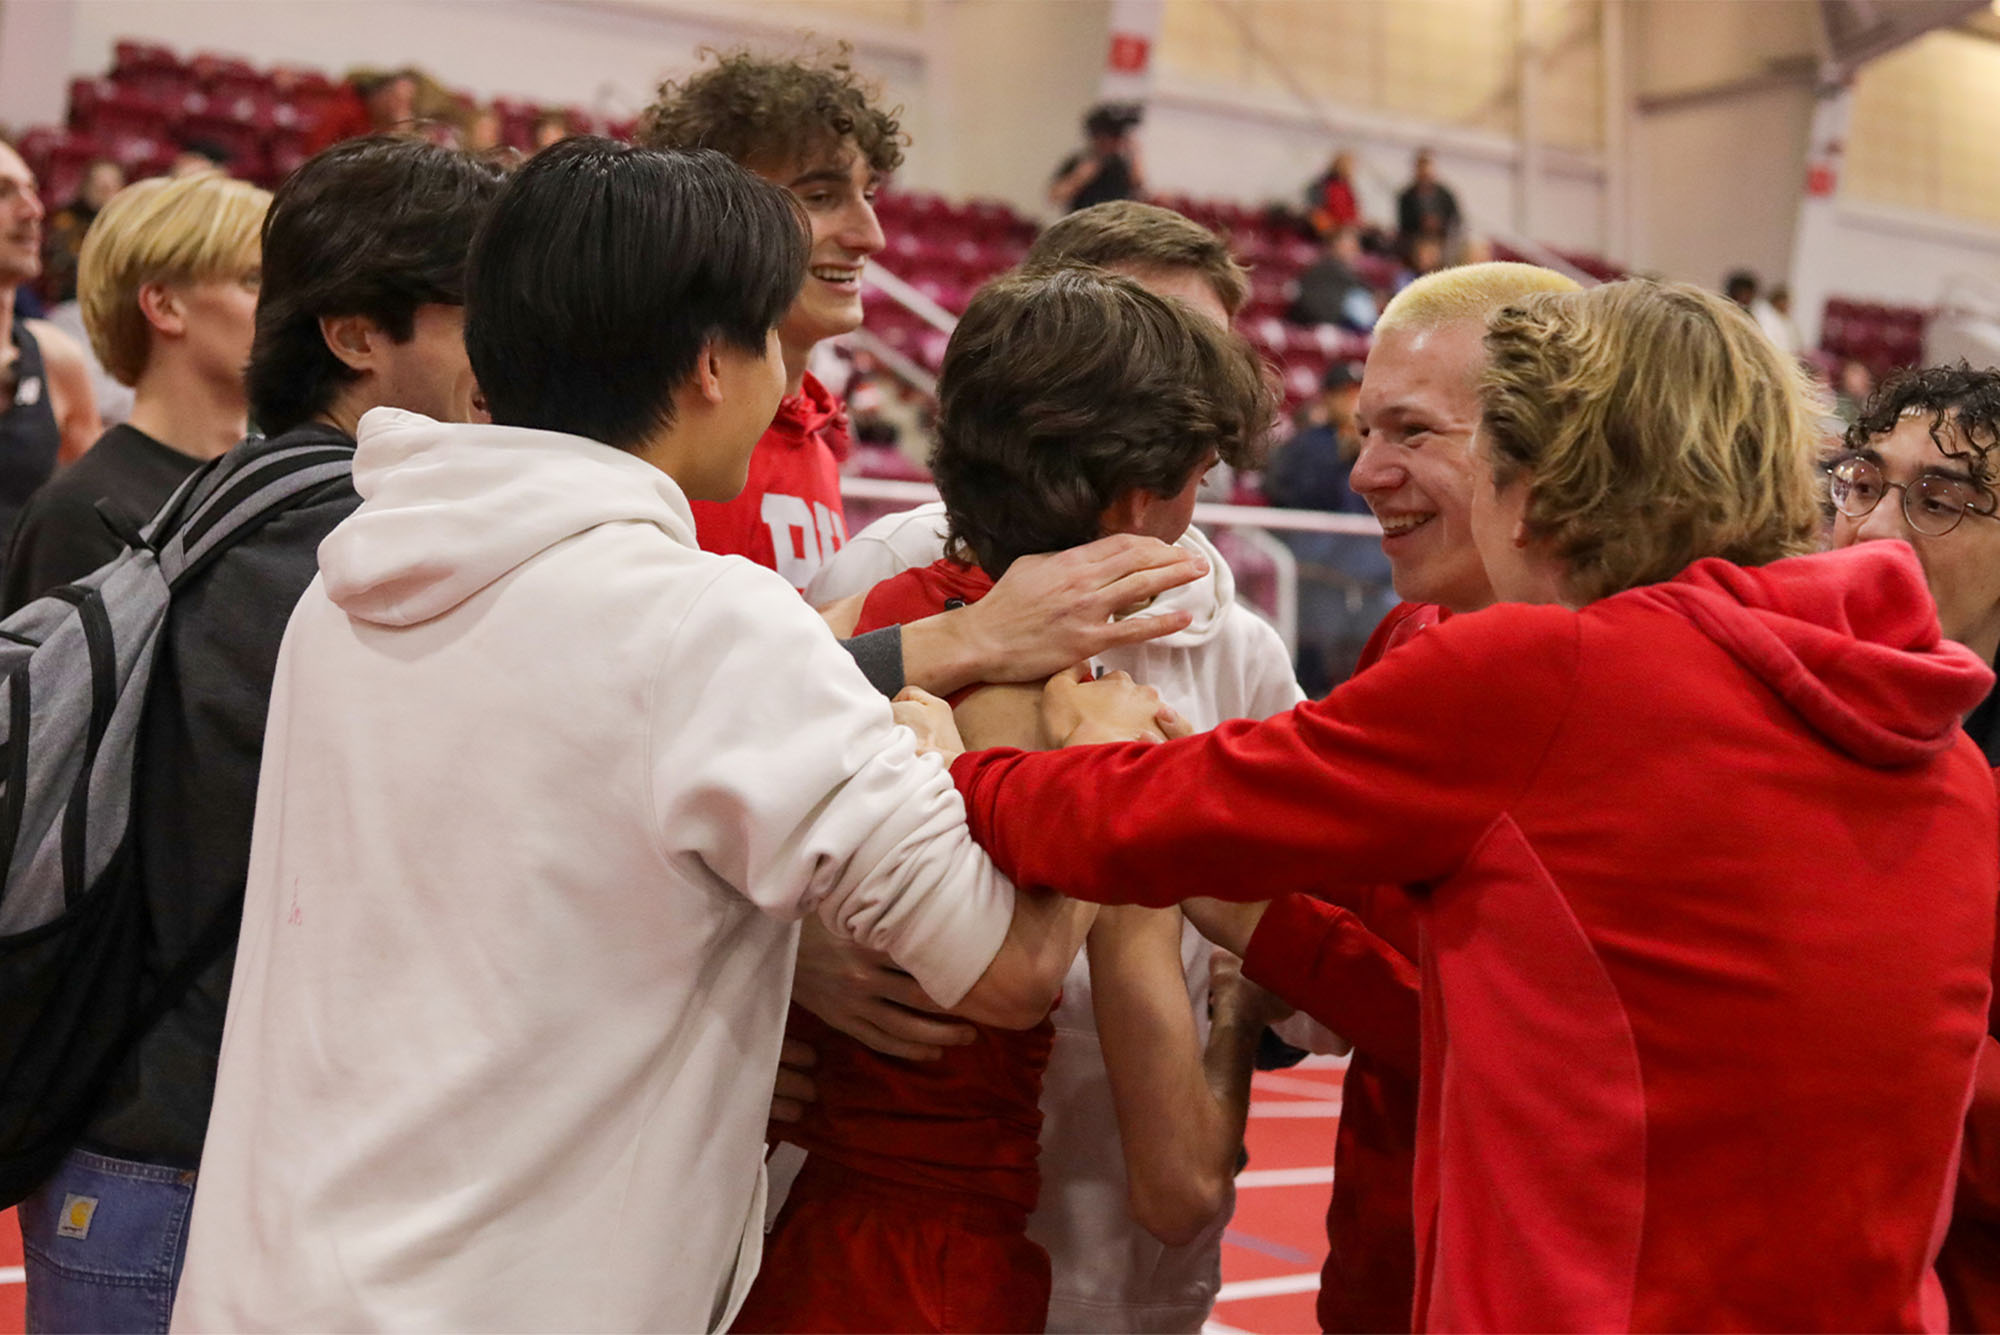 Photo: A group of college athletes celebrating together at a recent track and field meet